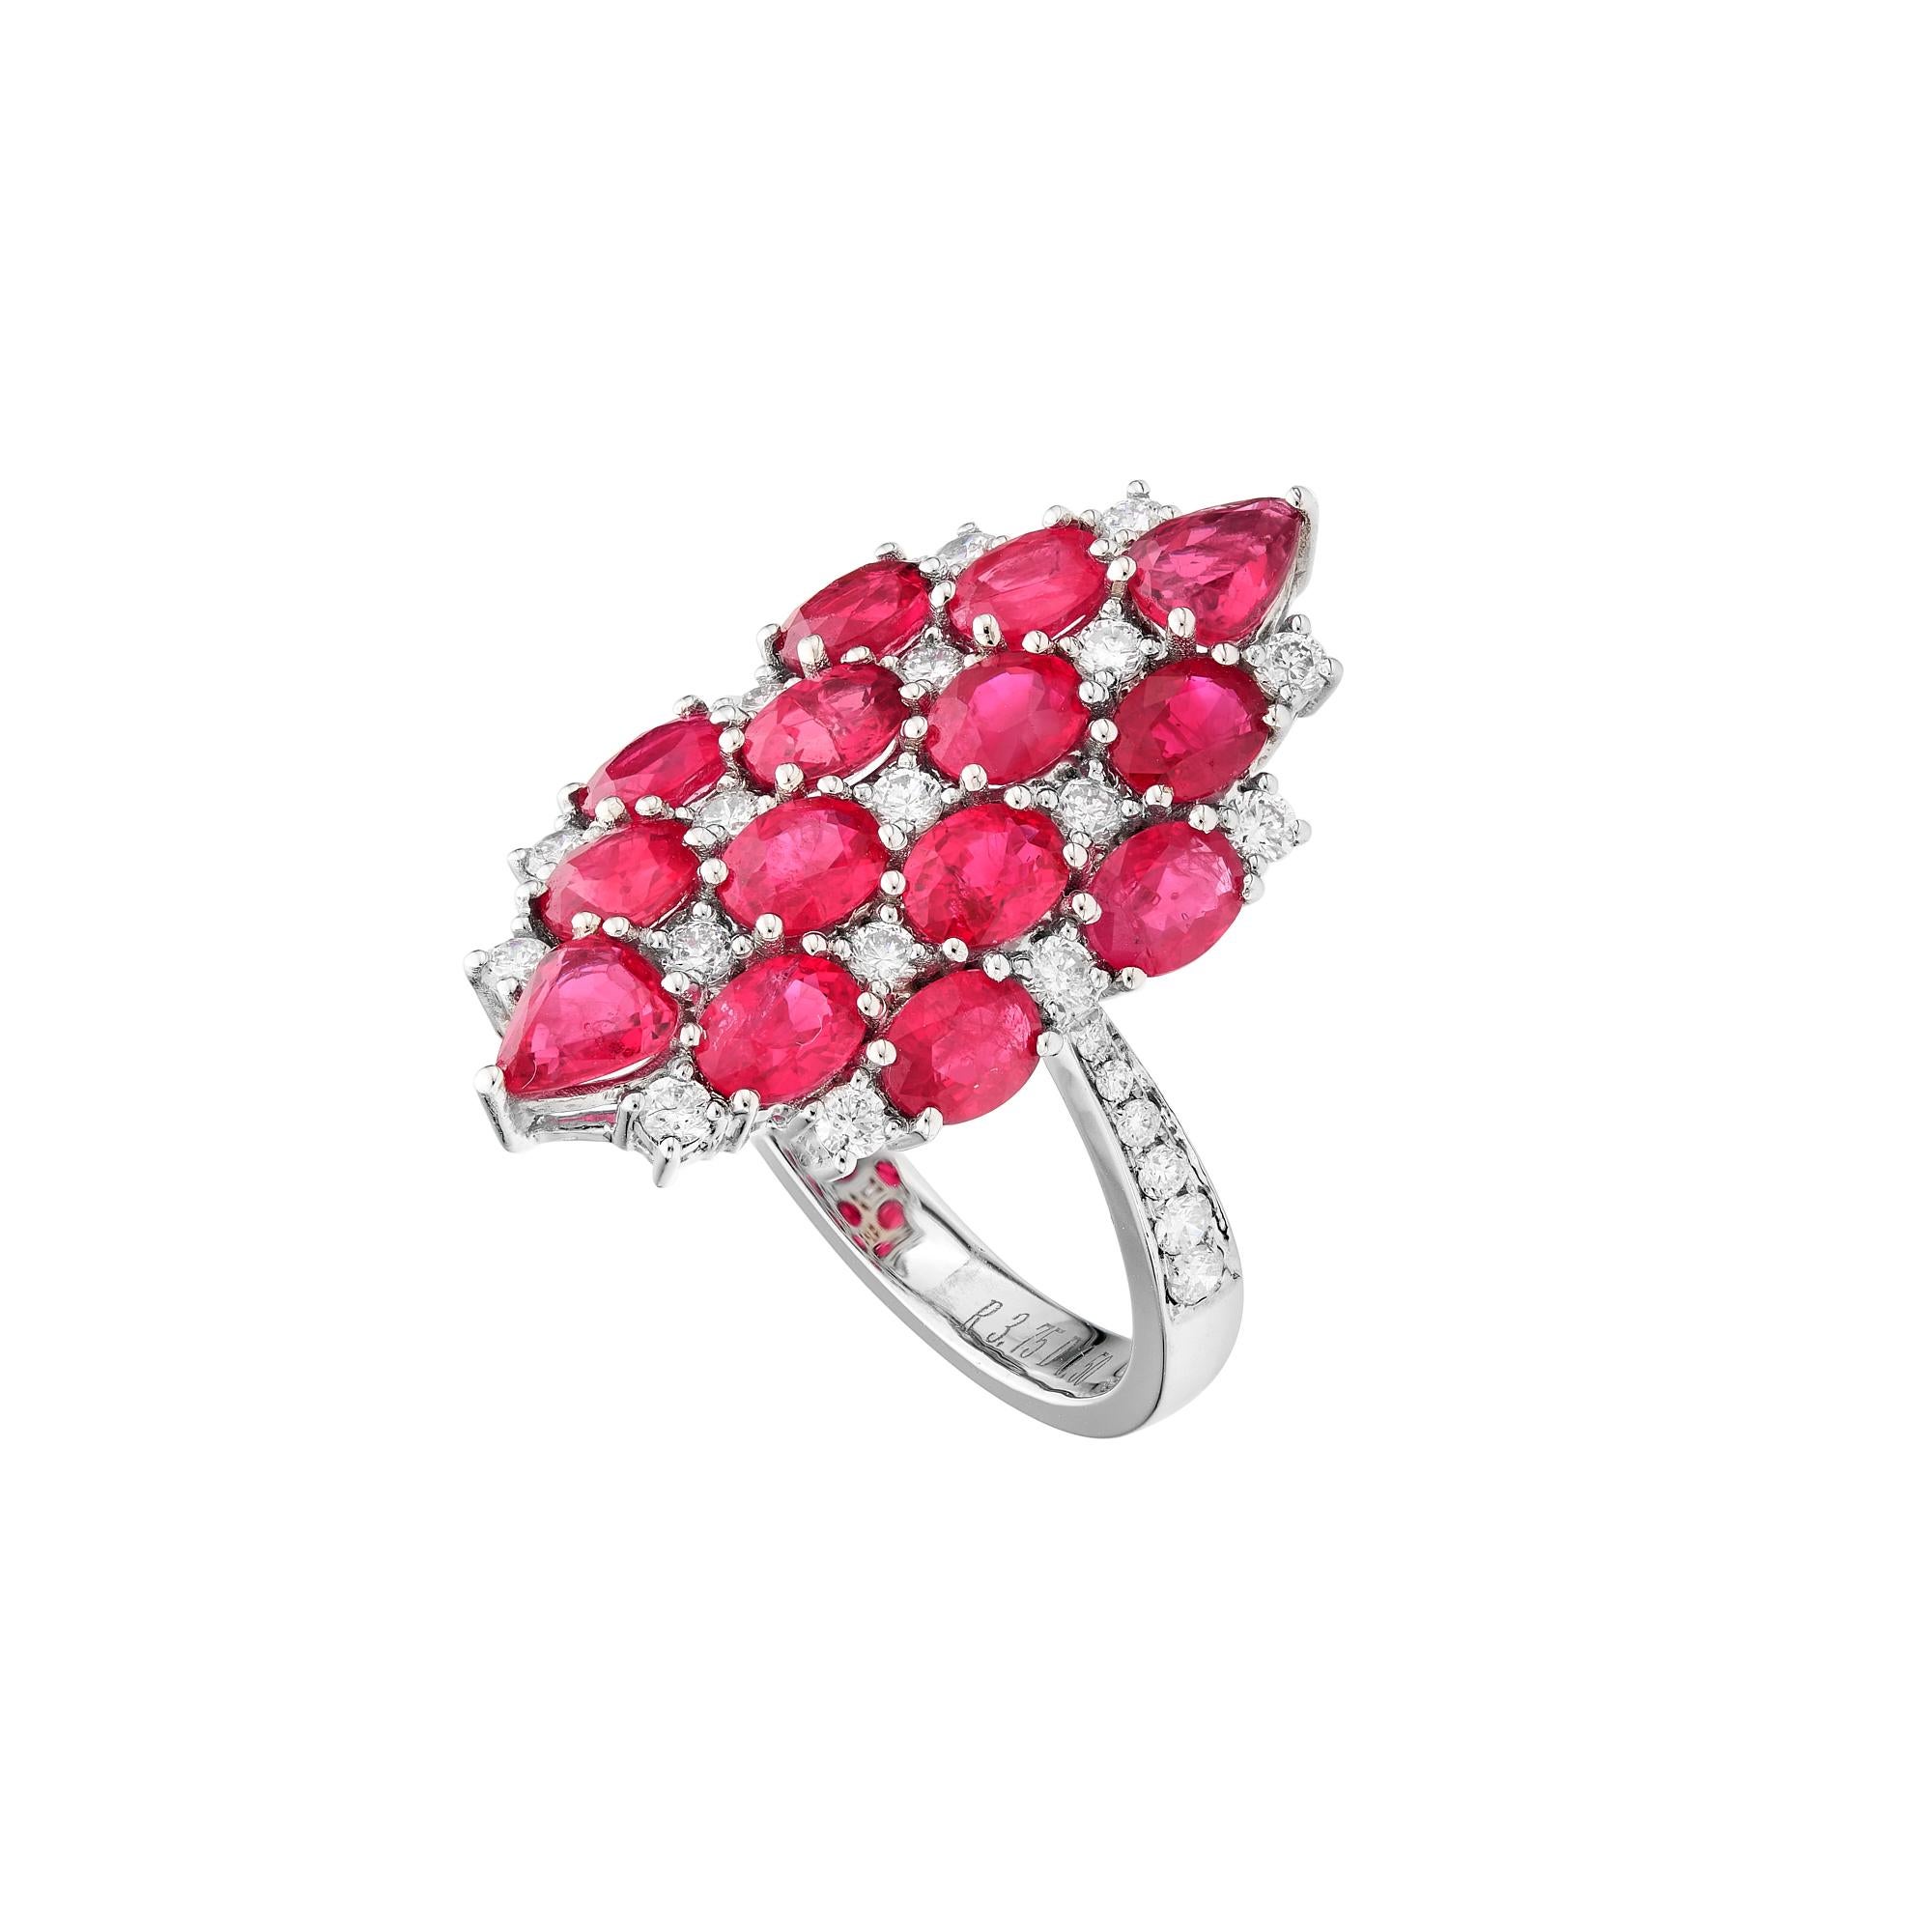 18K White Gold.
Ruby: 3.75ct total weight
Diamonds: 0.50ct total weight
All diamonds are G-H/SI stones. 